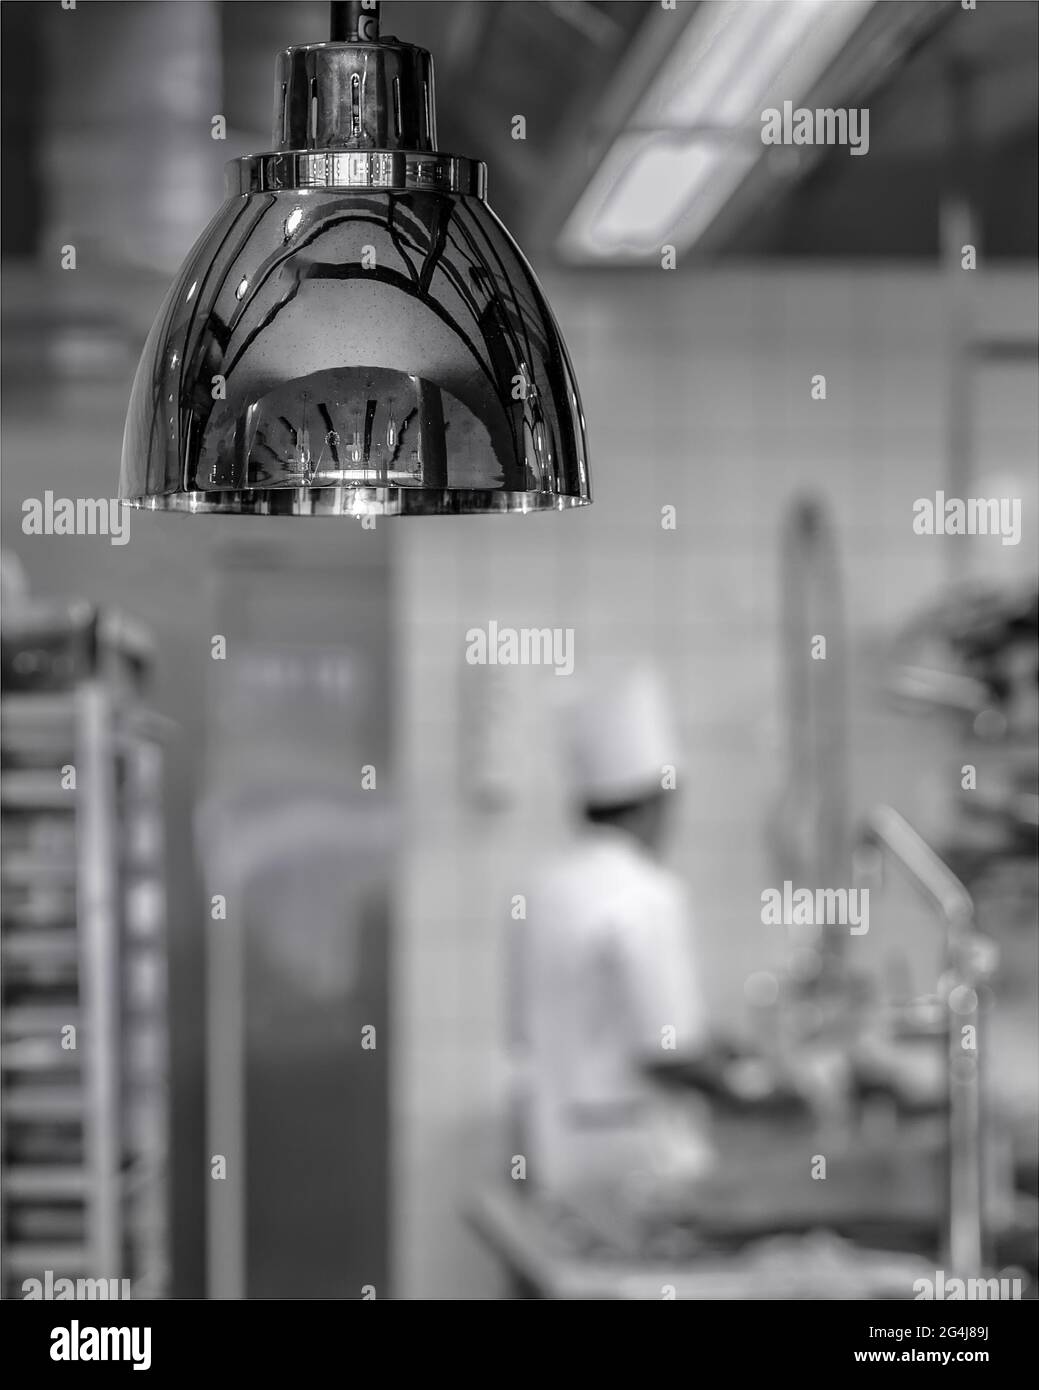 Shiny, stainless warming light in foreground of a commercial kitchen with a chef wearing all white in the background. Stock Photo